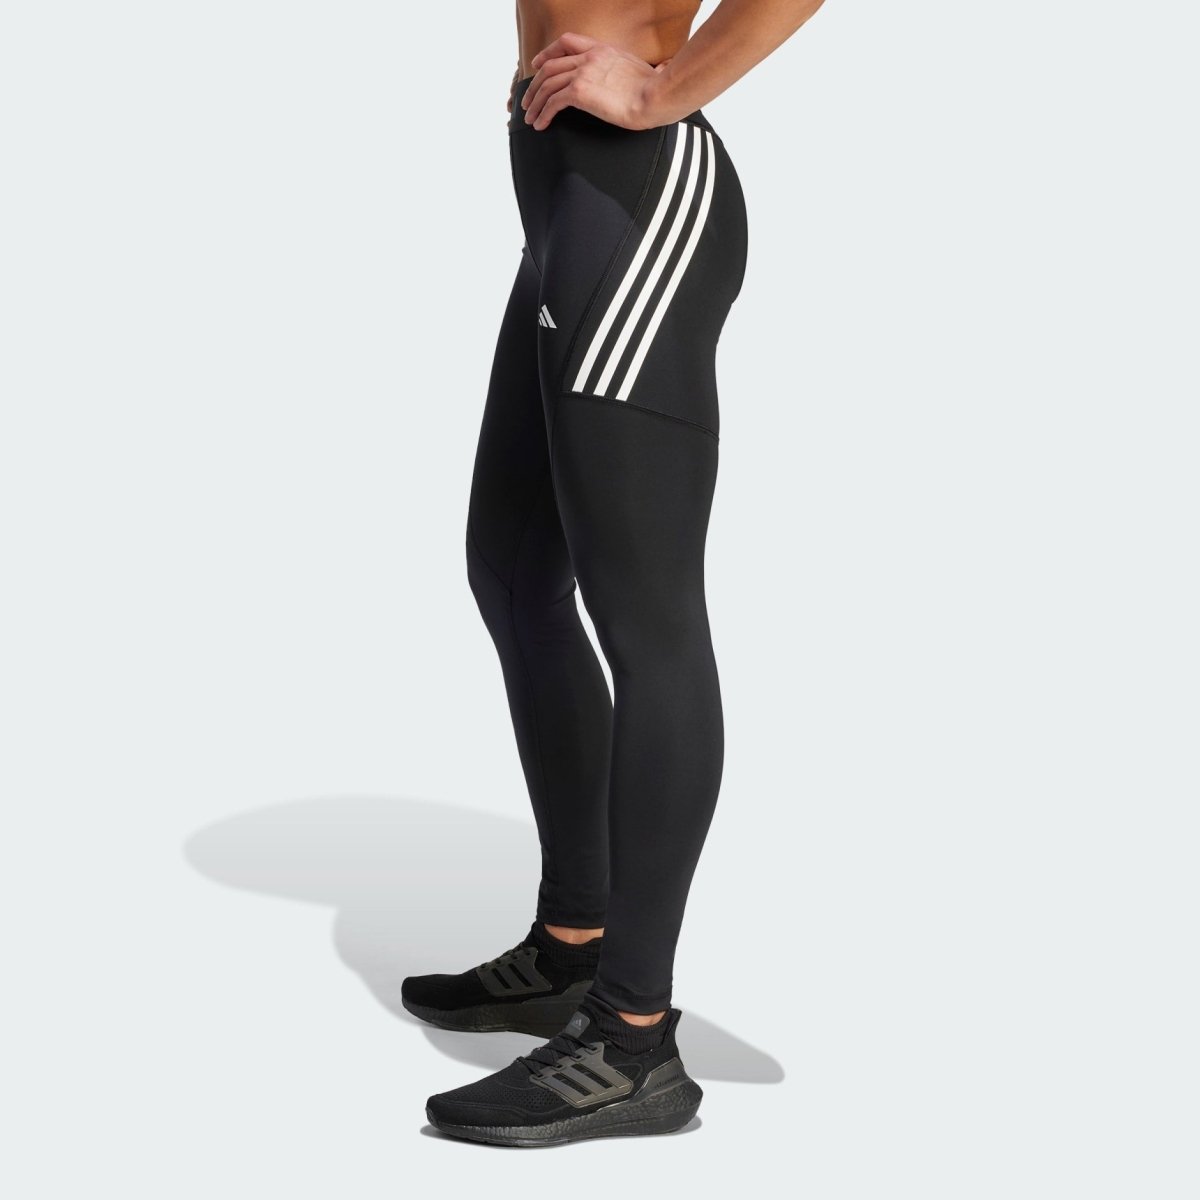 adidas Training Techfit wrapped 3 stripe leggings in black - ShopStyle  Activewear Trousers